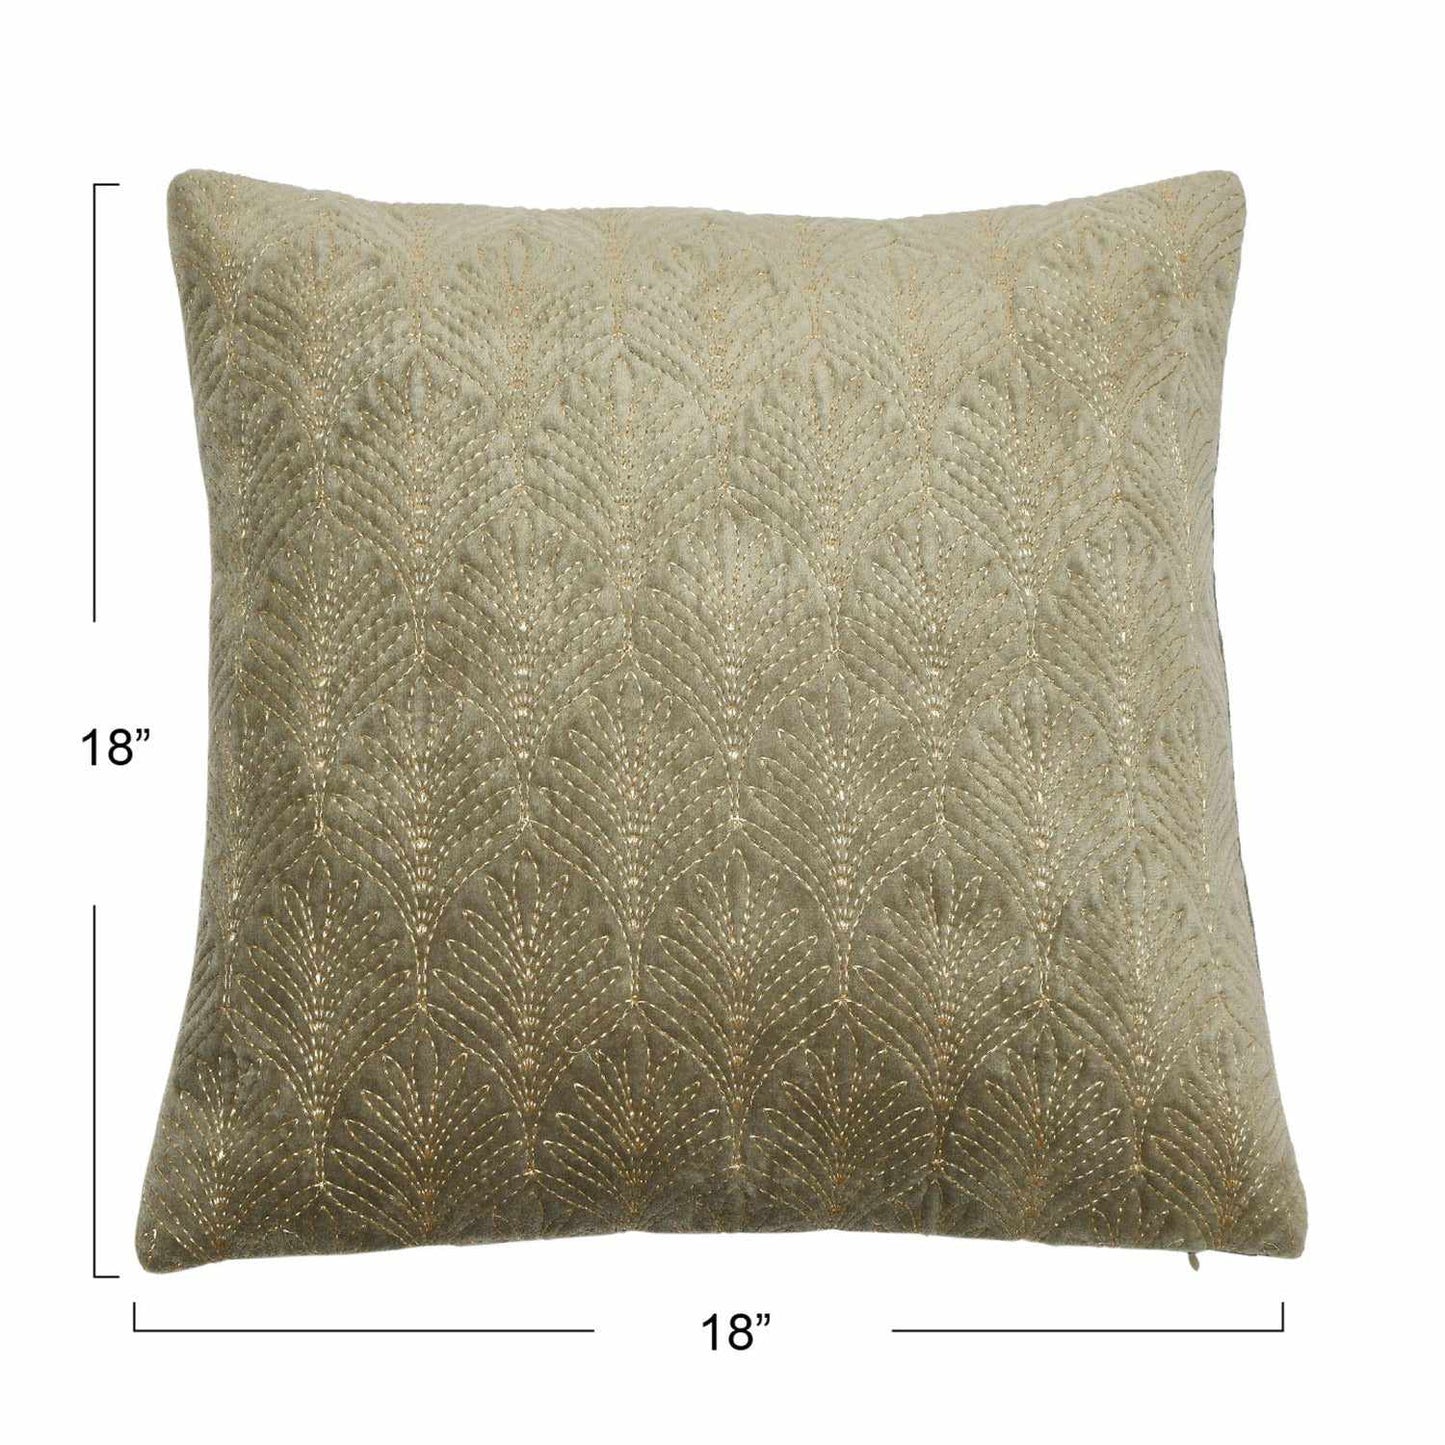 Cotton Velvet Embroidered Pillow w/ Gold Metallic Thread, Polyester Fill | Bridal Shower Krystin Yarbrough & Colton Weatherly